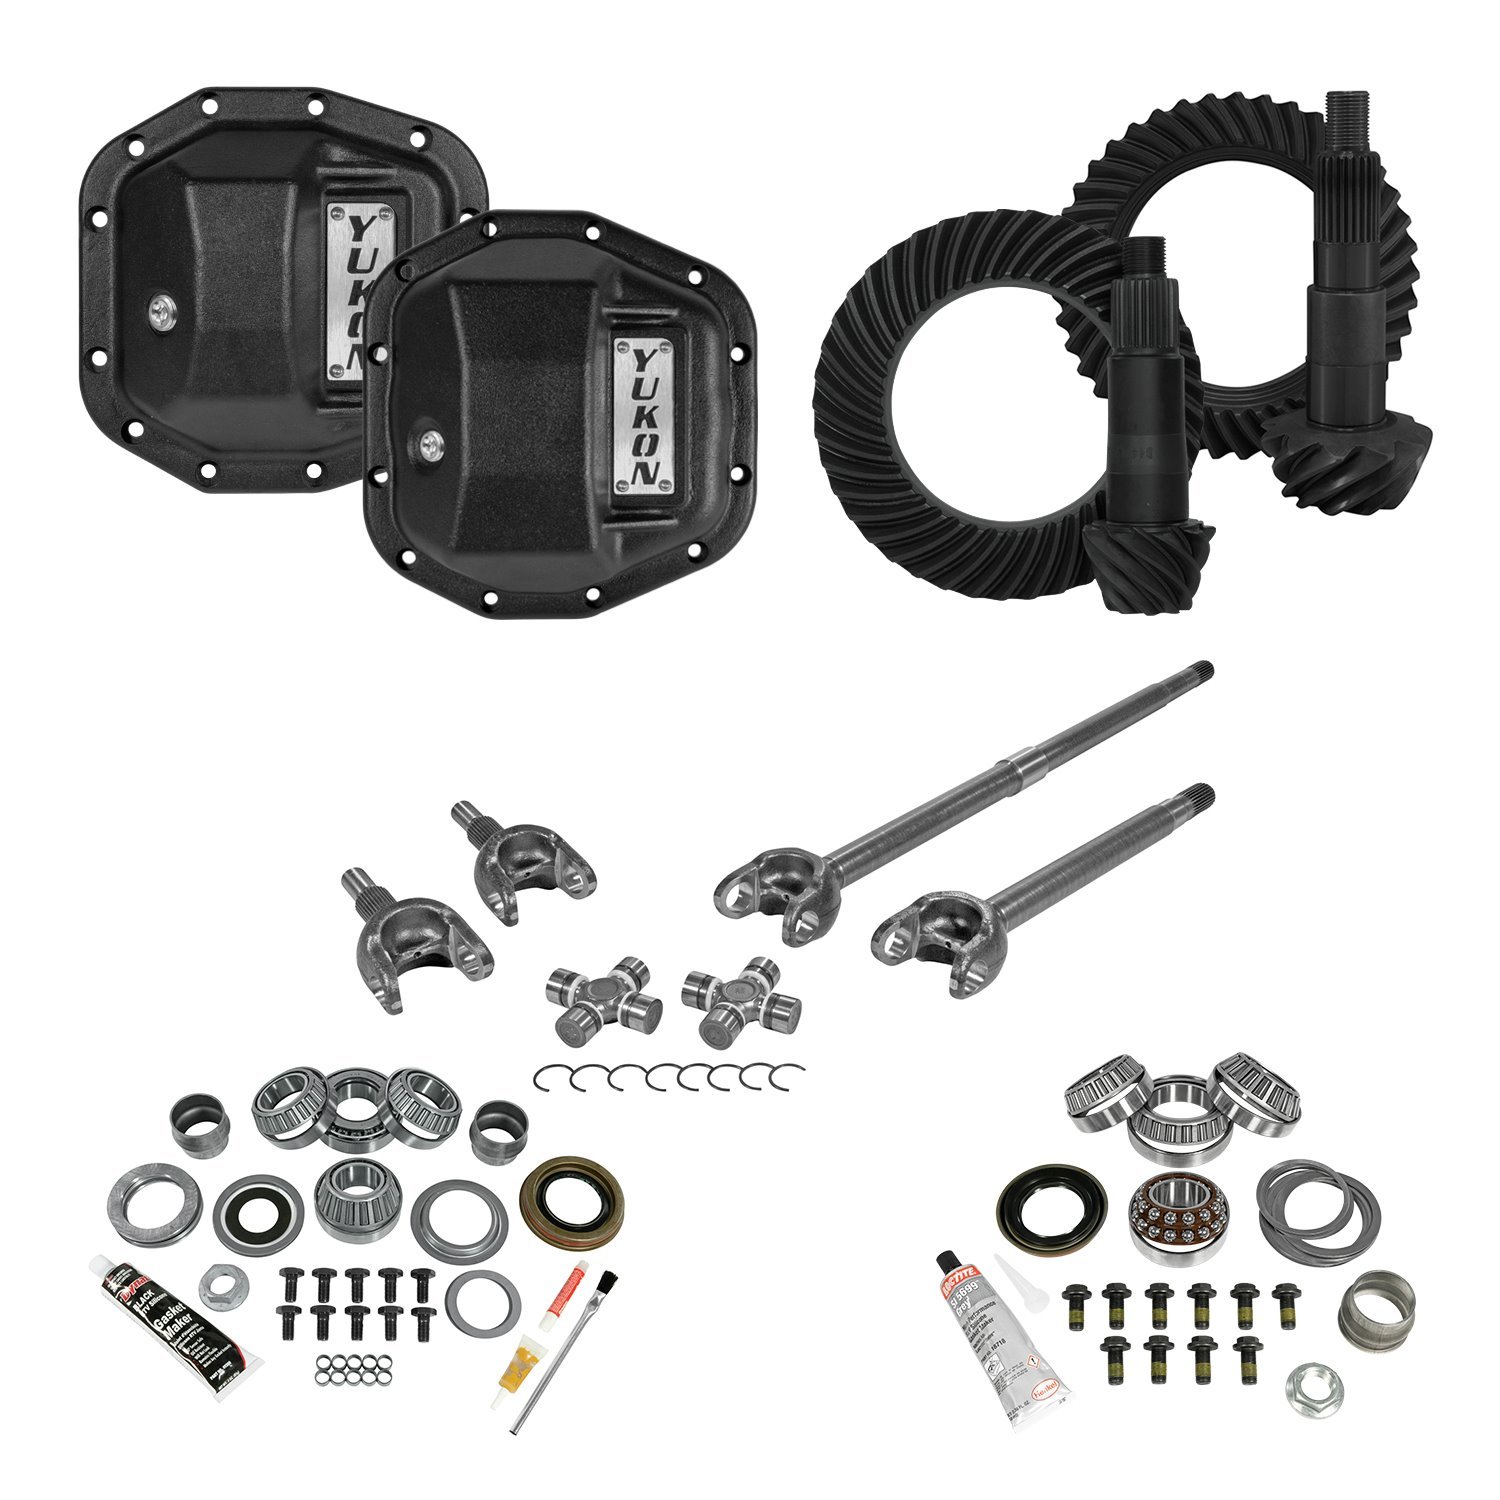 Stage 3 Jeep Re-Gear Kit W/Covers, Front Axles For Dana 30/44, 5.13 Ratio